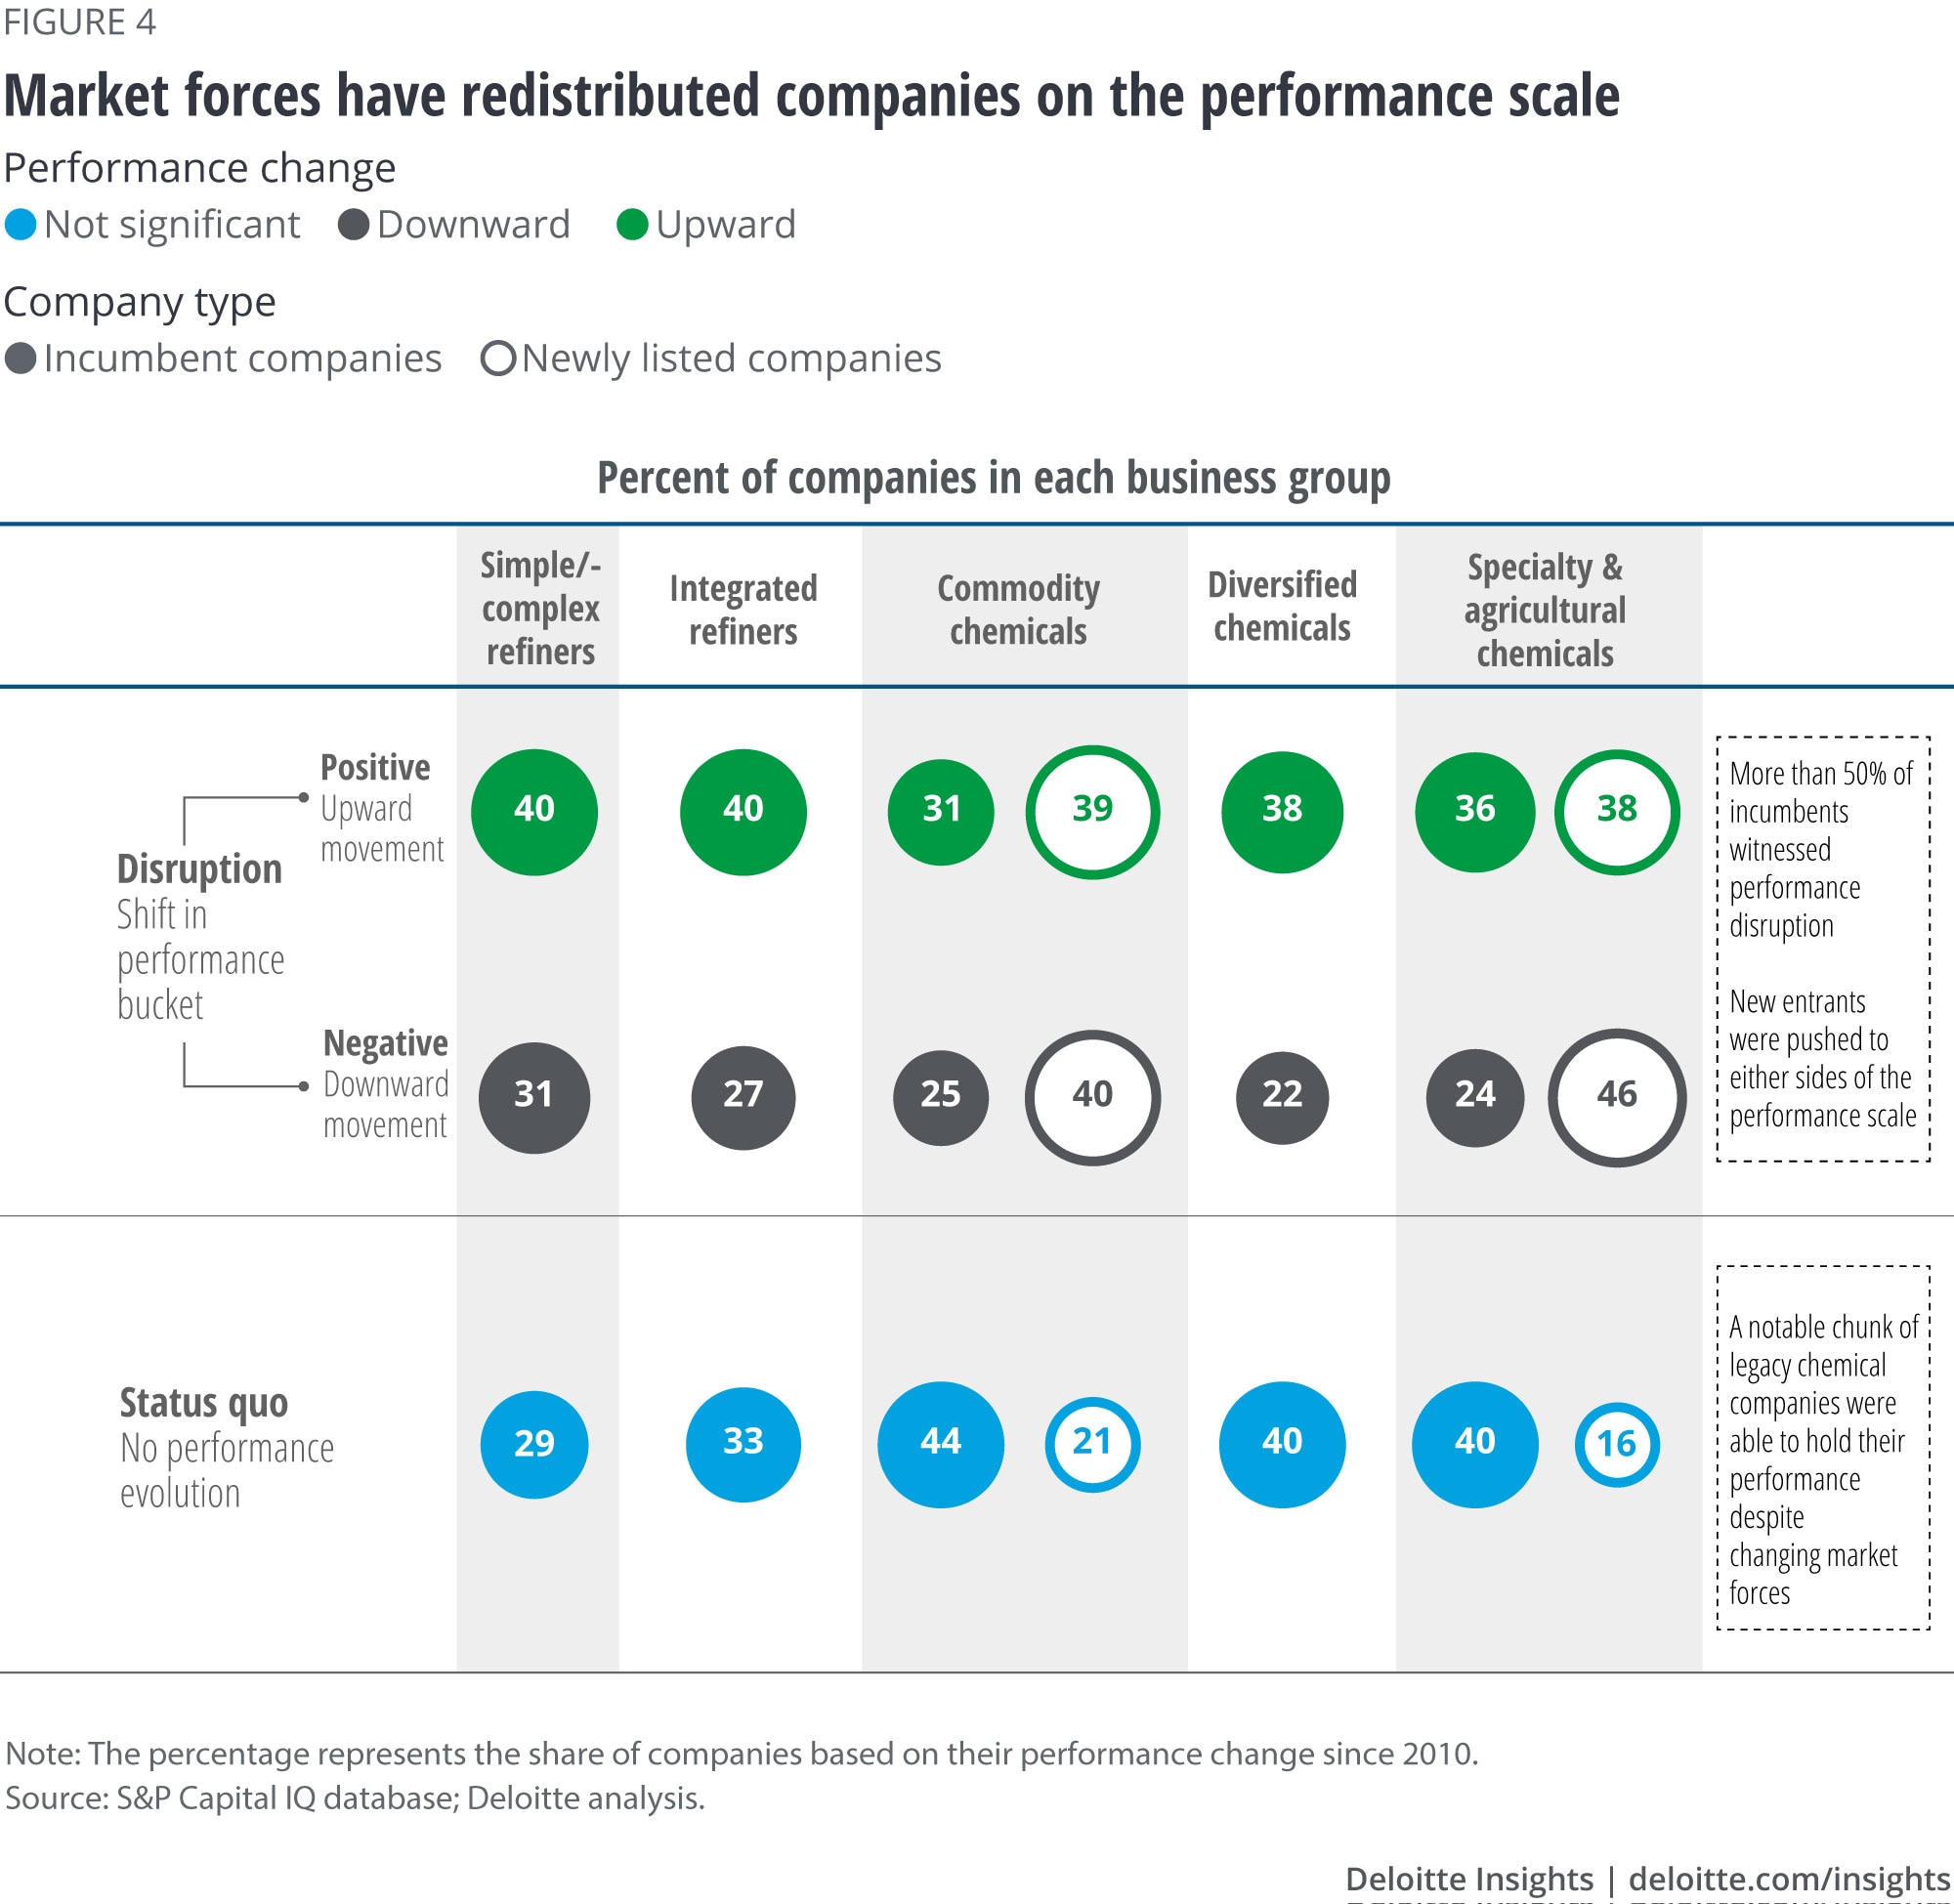 Market forces have redistributed companies on the performance scale